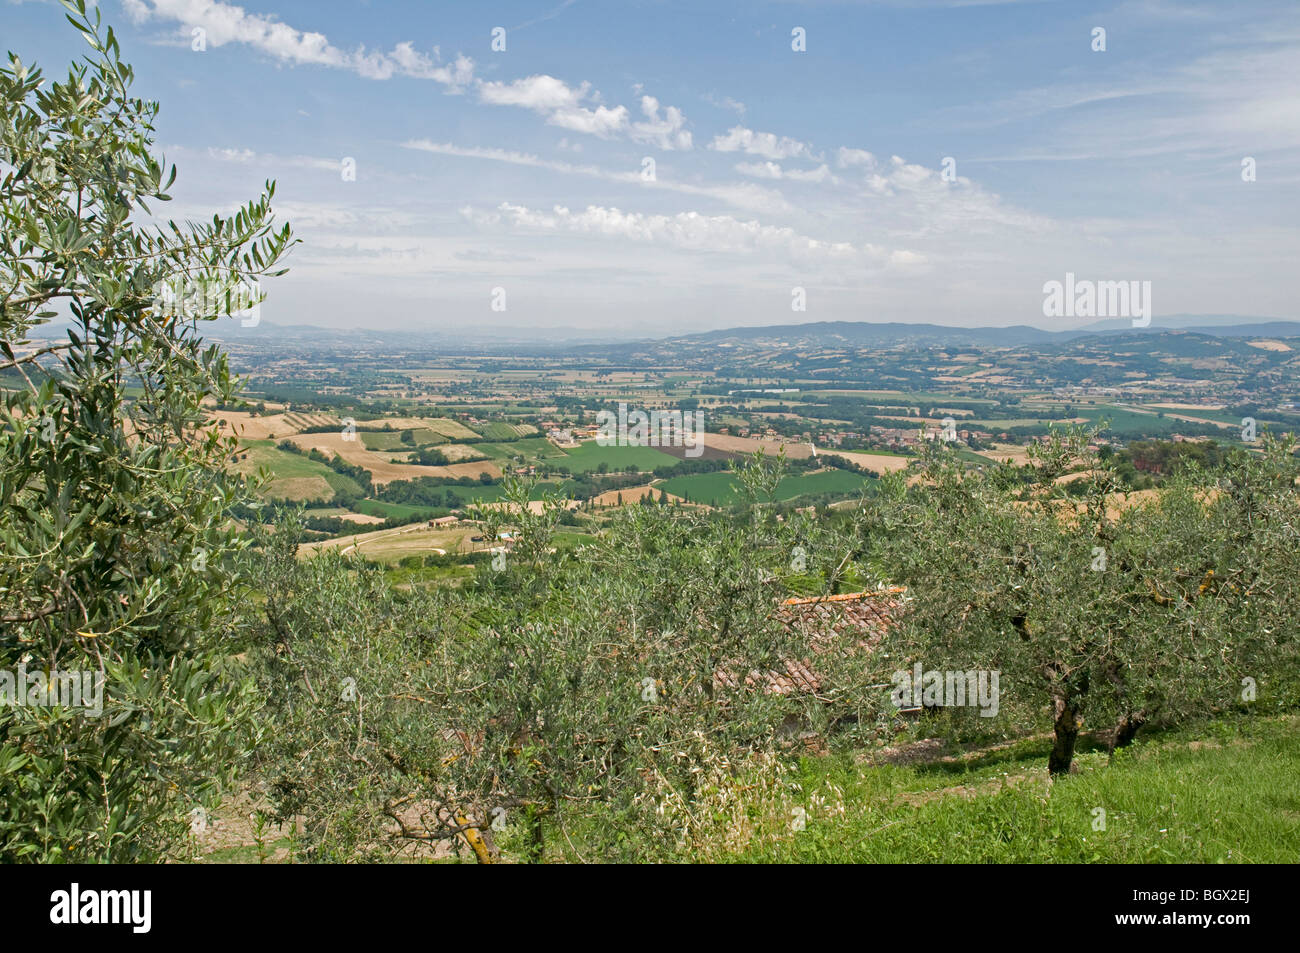 Looking out across the Tevere valley from Monte Castello di Vibio, Umbria Stock Photo